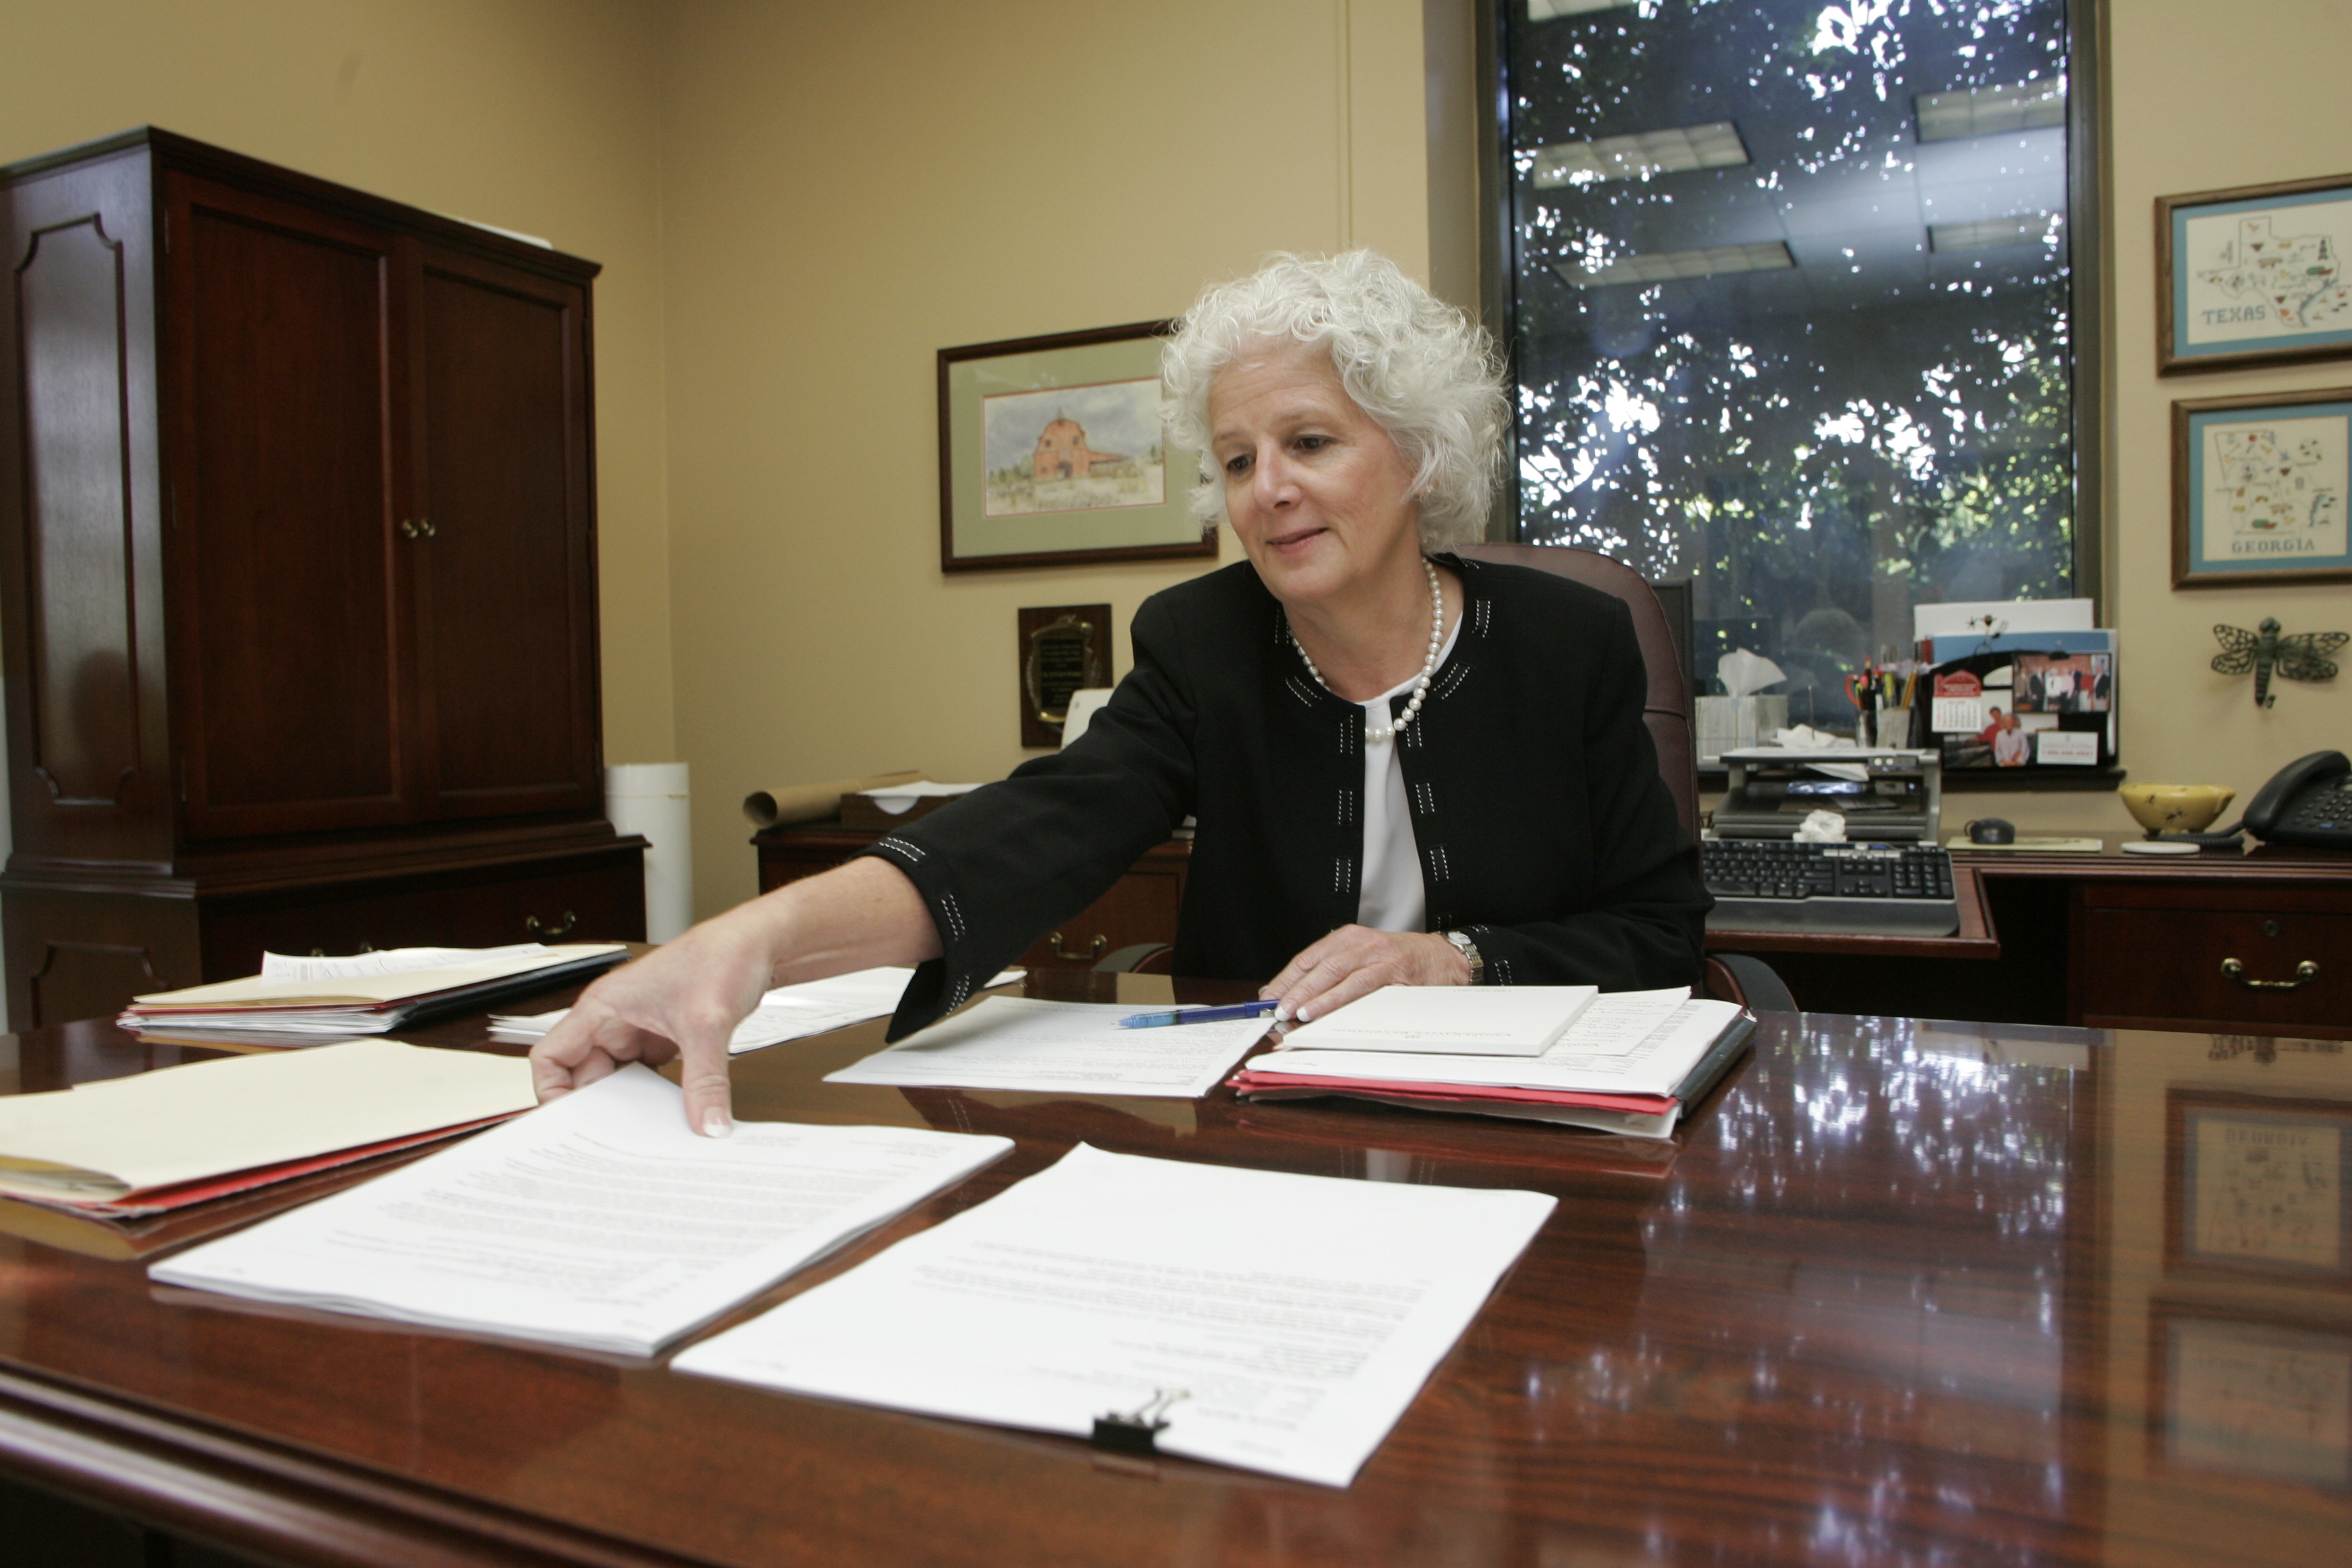 Beverly Sparks sits at a desk reaching for a stack of papers